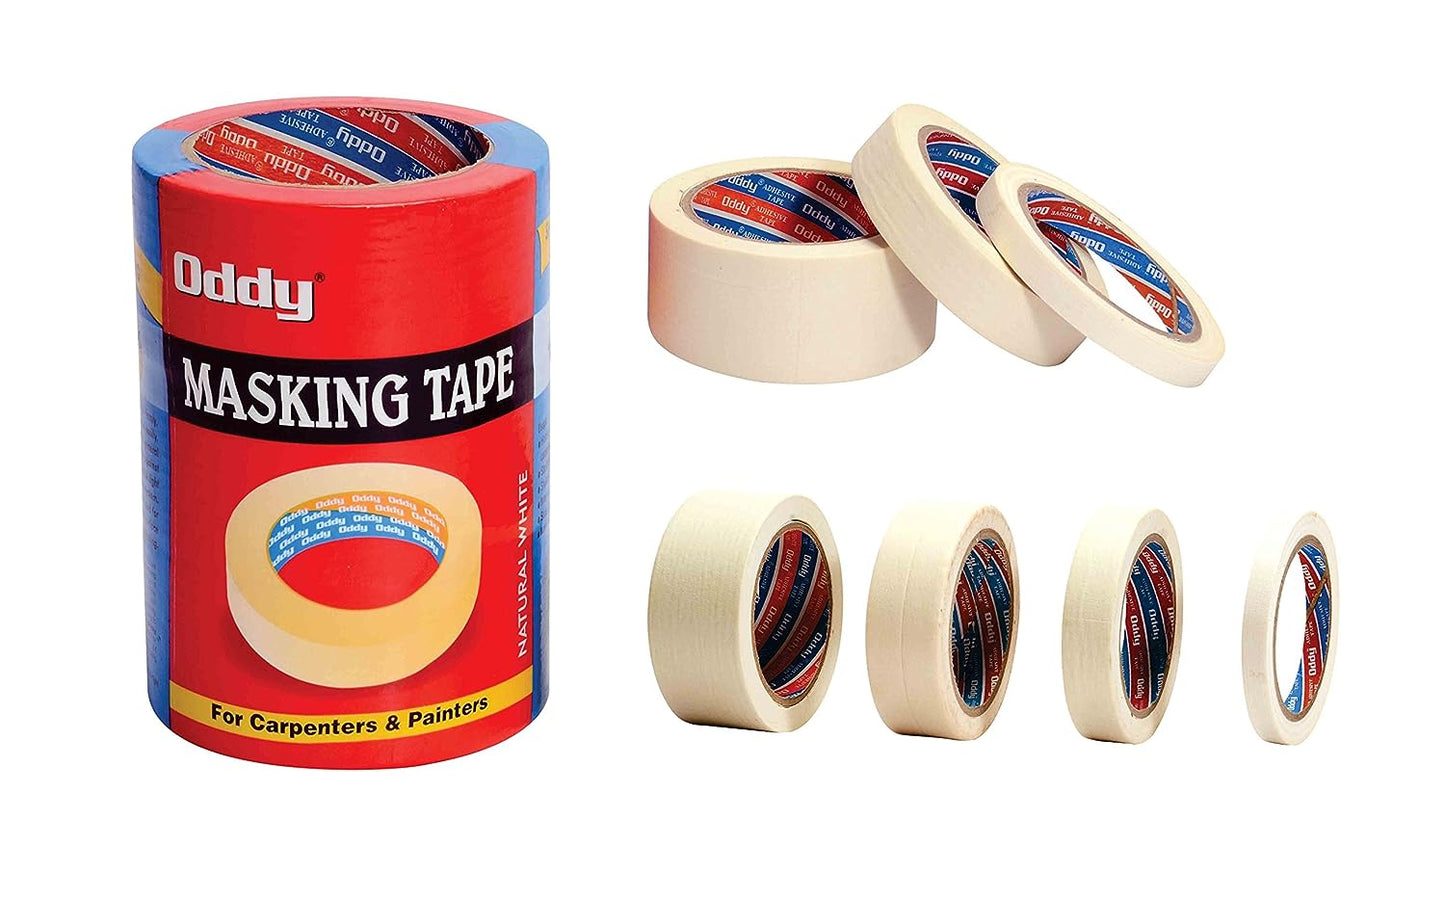 Oddy 72mm Super Strong Self Adhesive Masking Tape-30 Mtrs. (Set of 2)